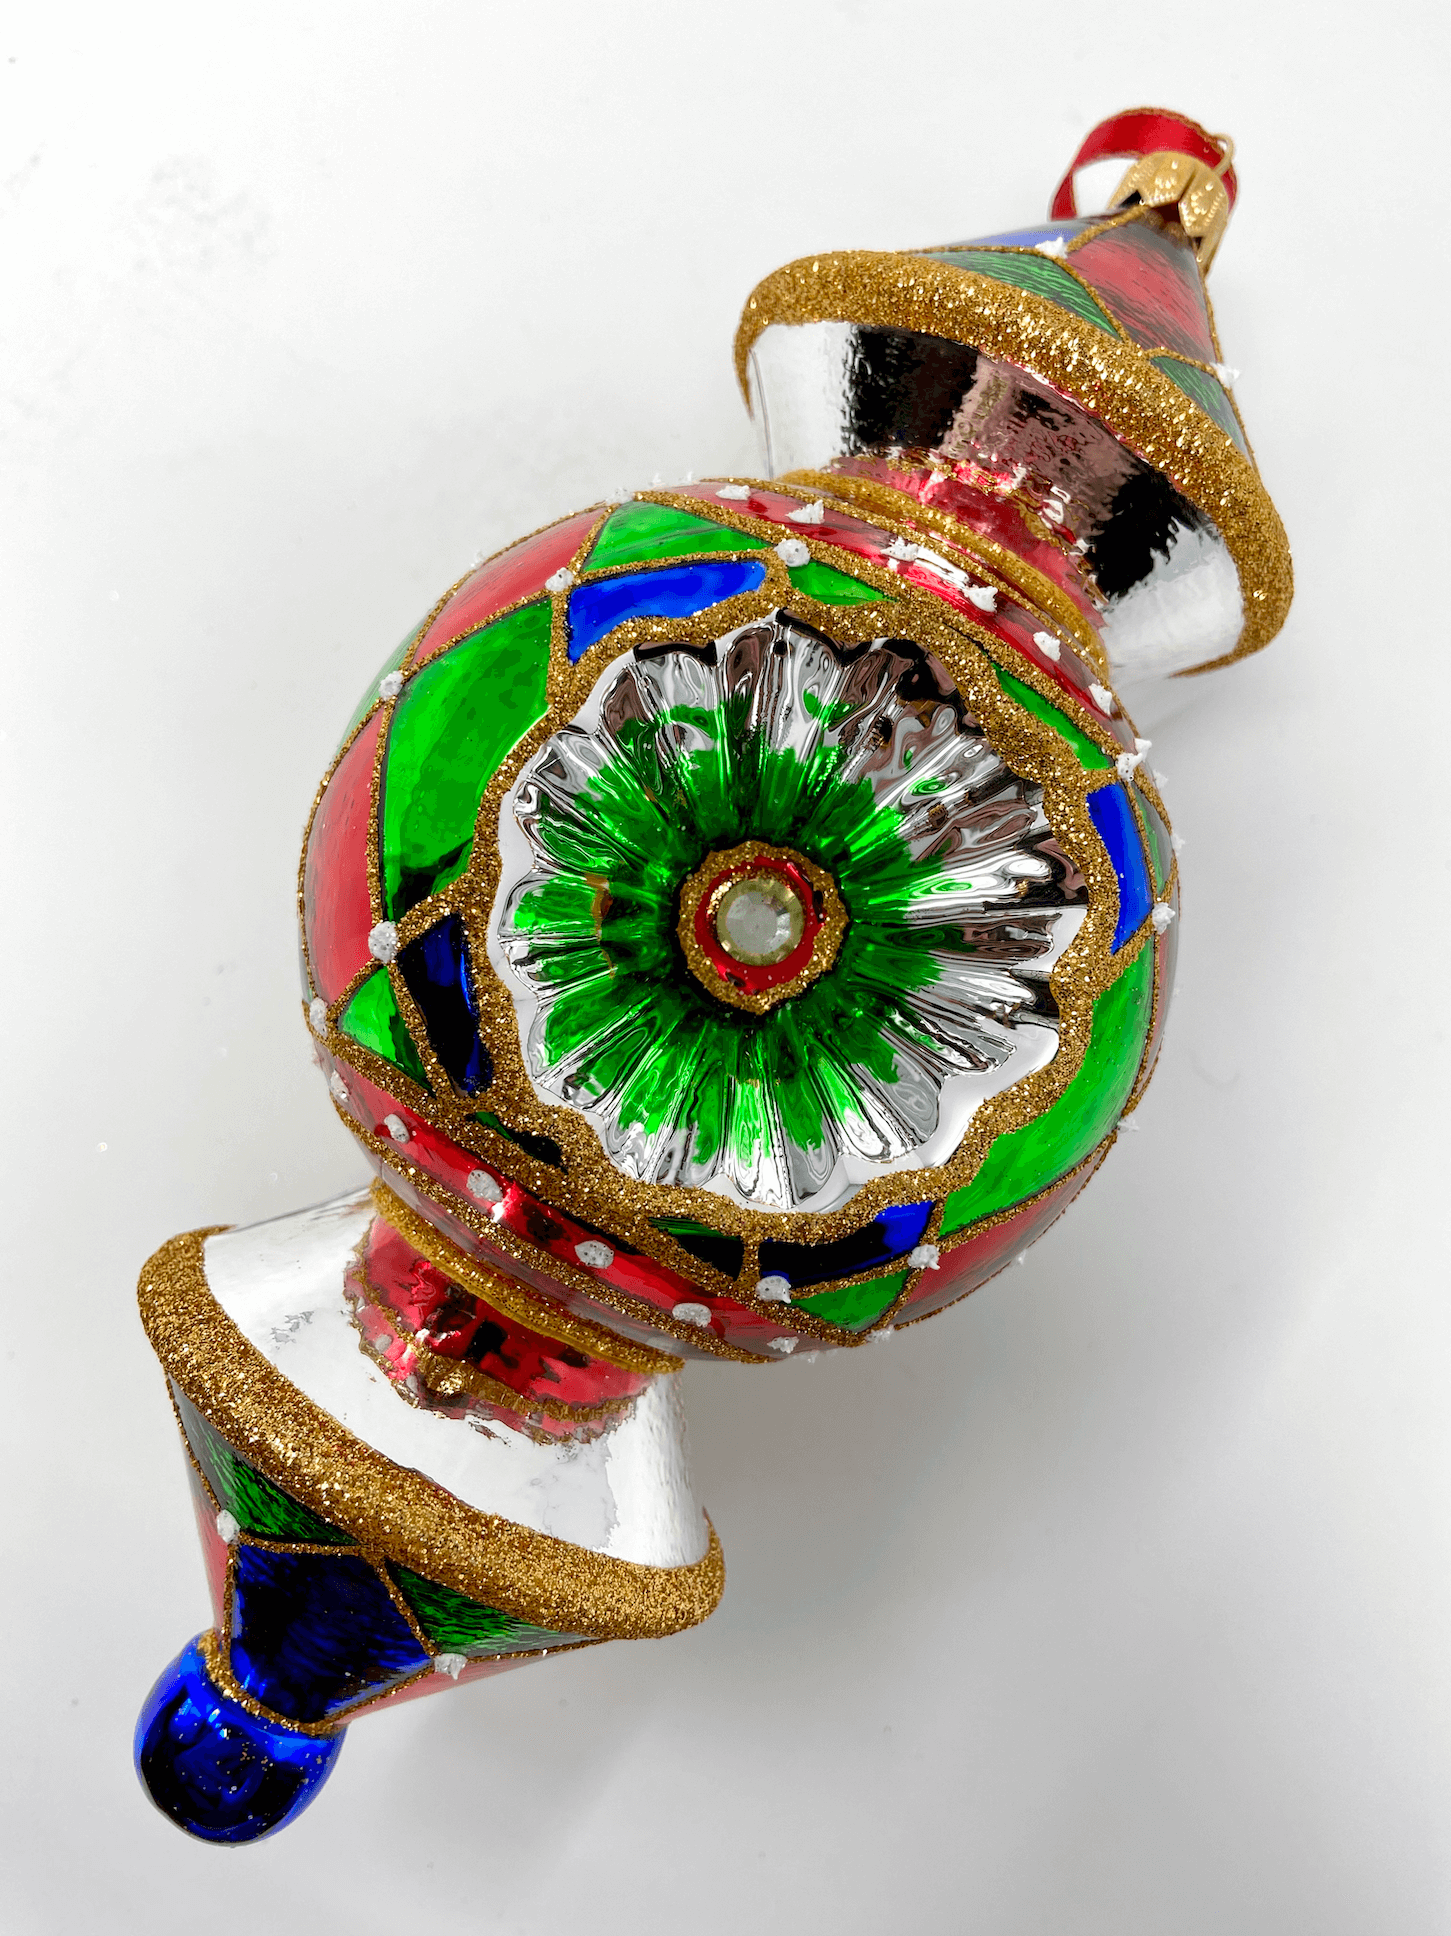 beautiful triple-barrel reflector glass ornament with colorful patterns and gold detailing. Polish glass christmas ornaments in saturated colors.